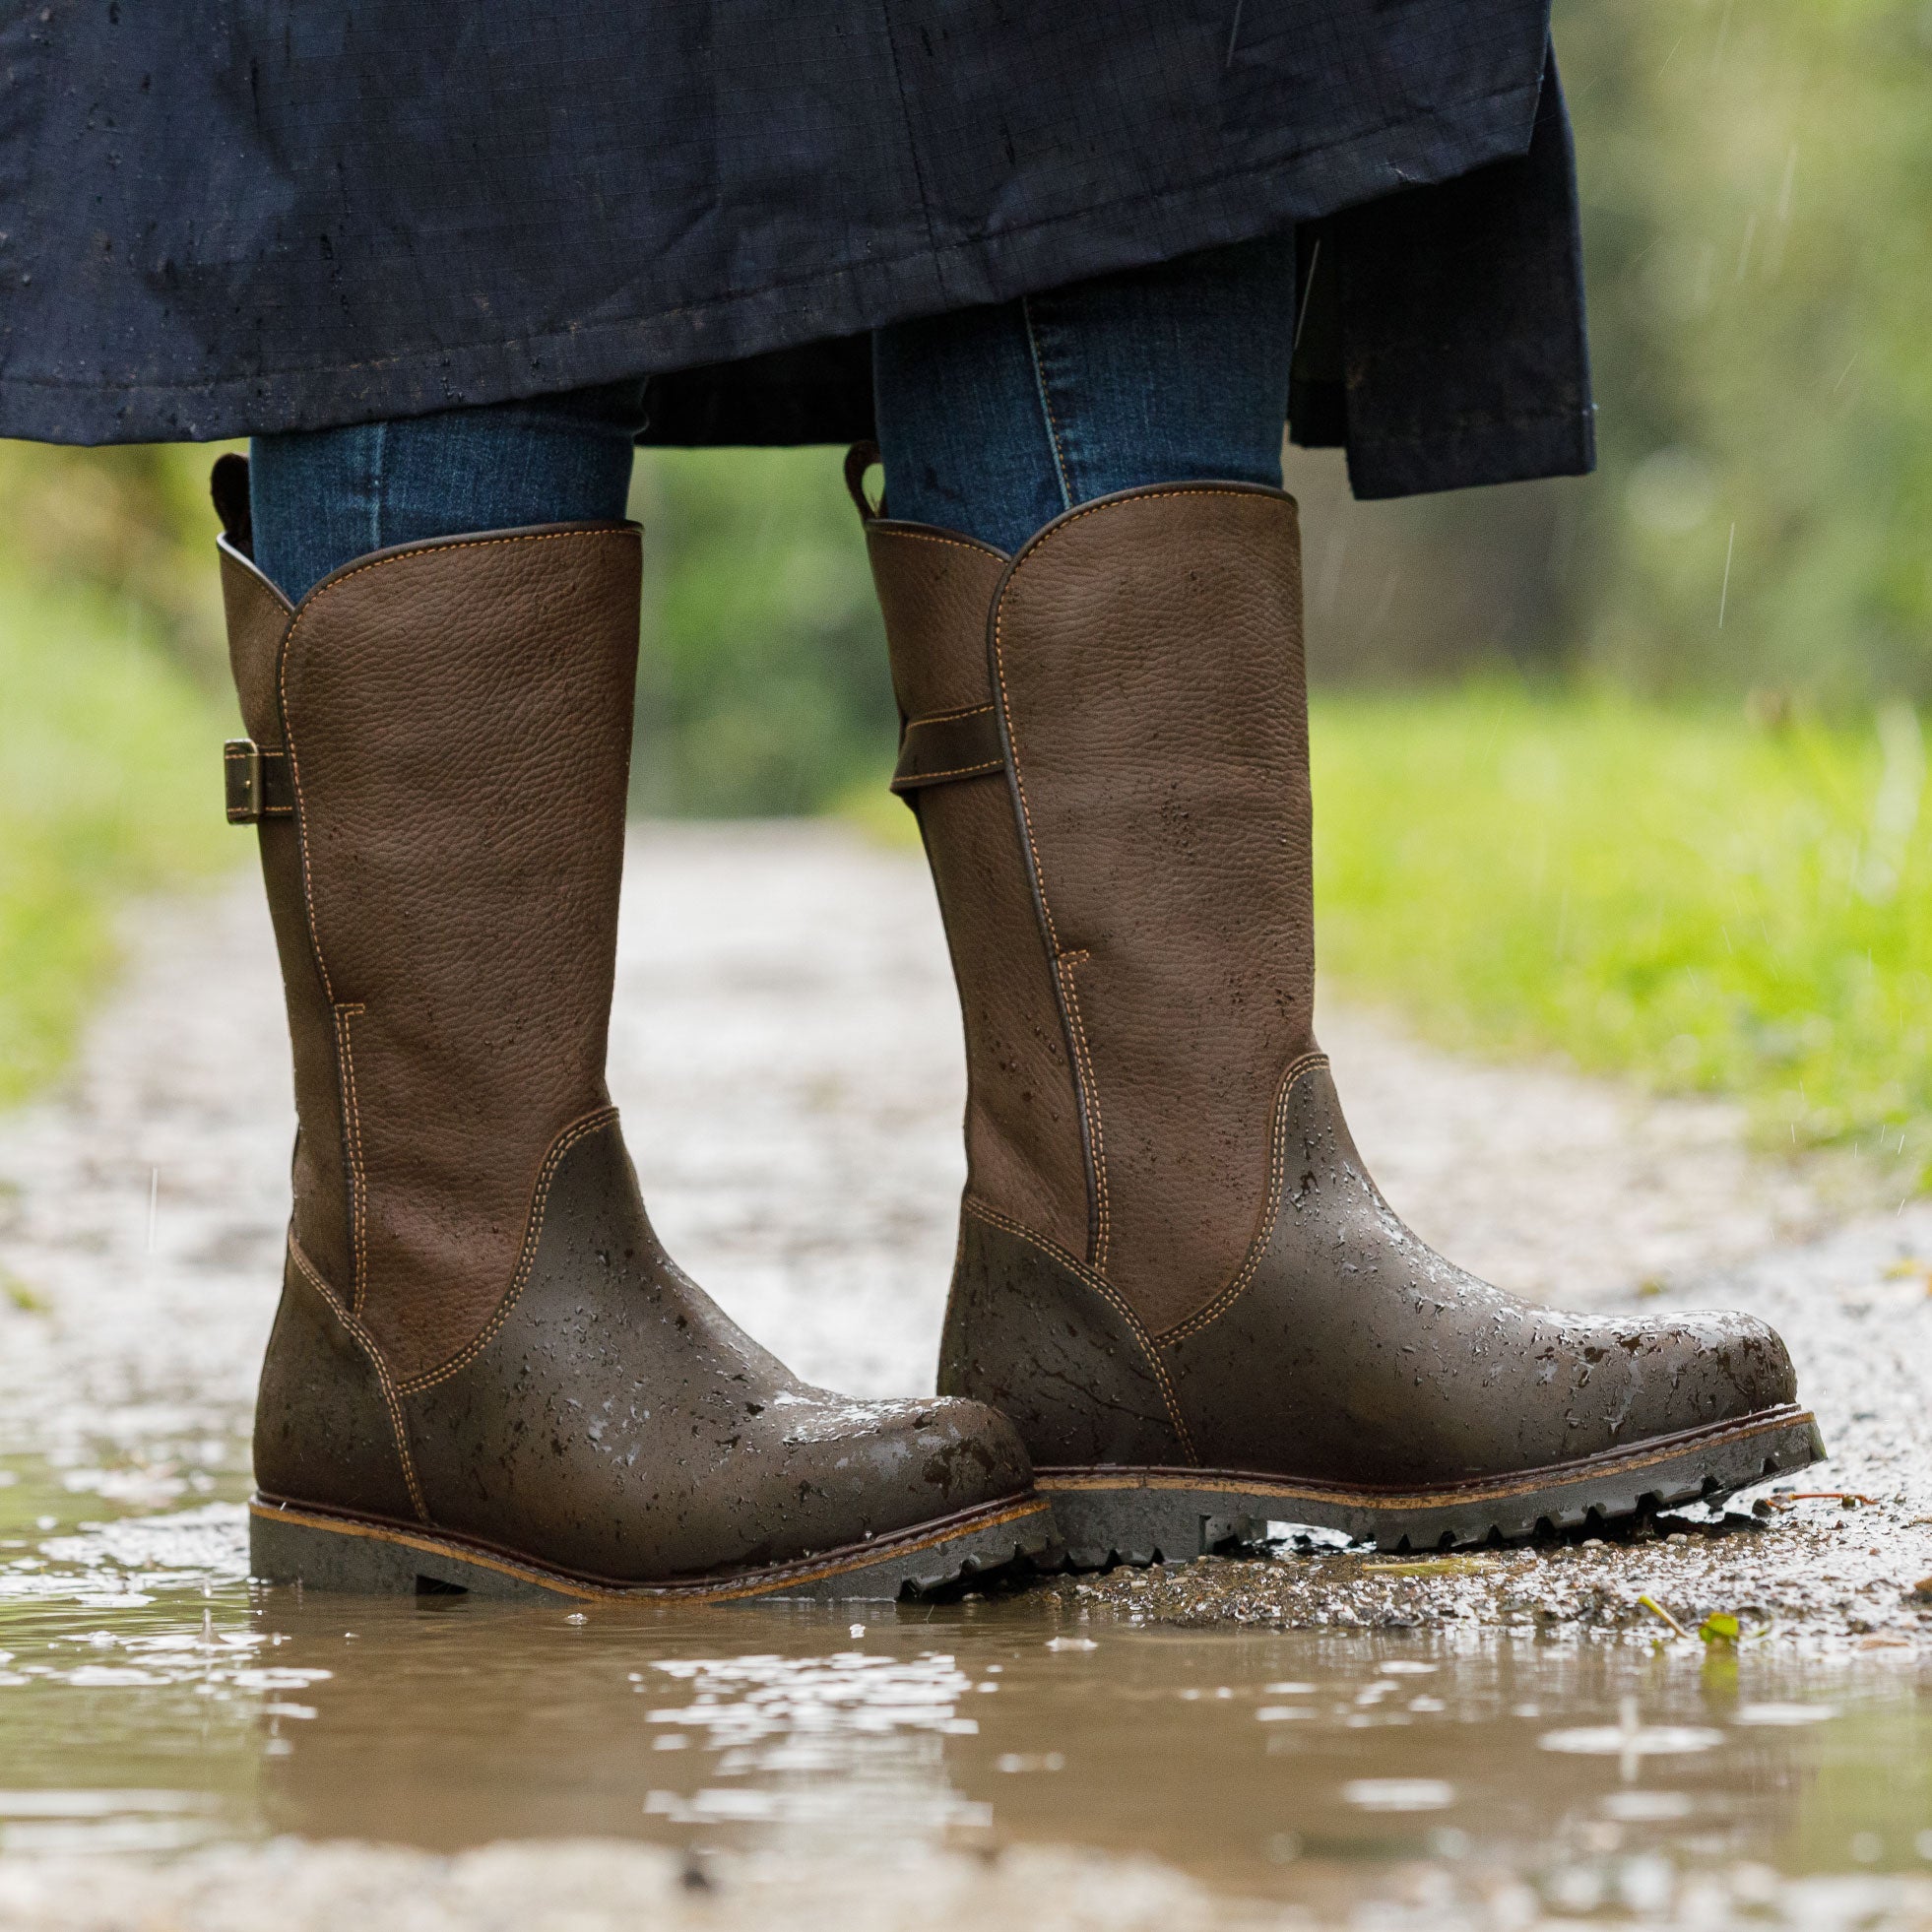 Resoling Waterproof Boots - What You Need to Know